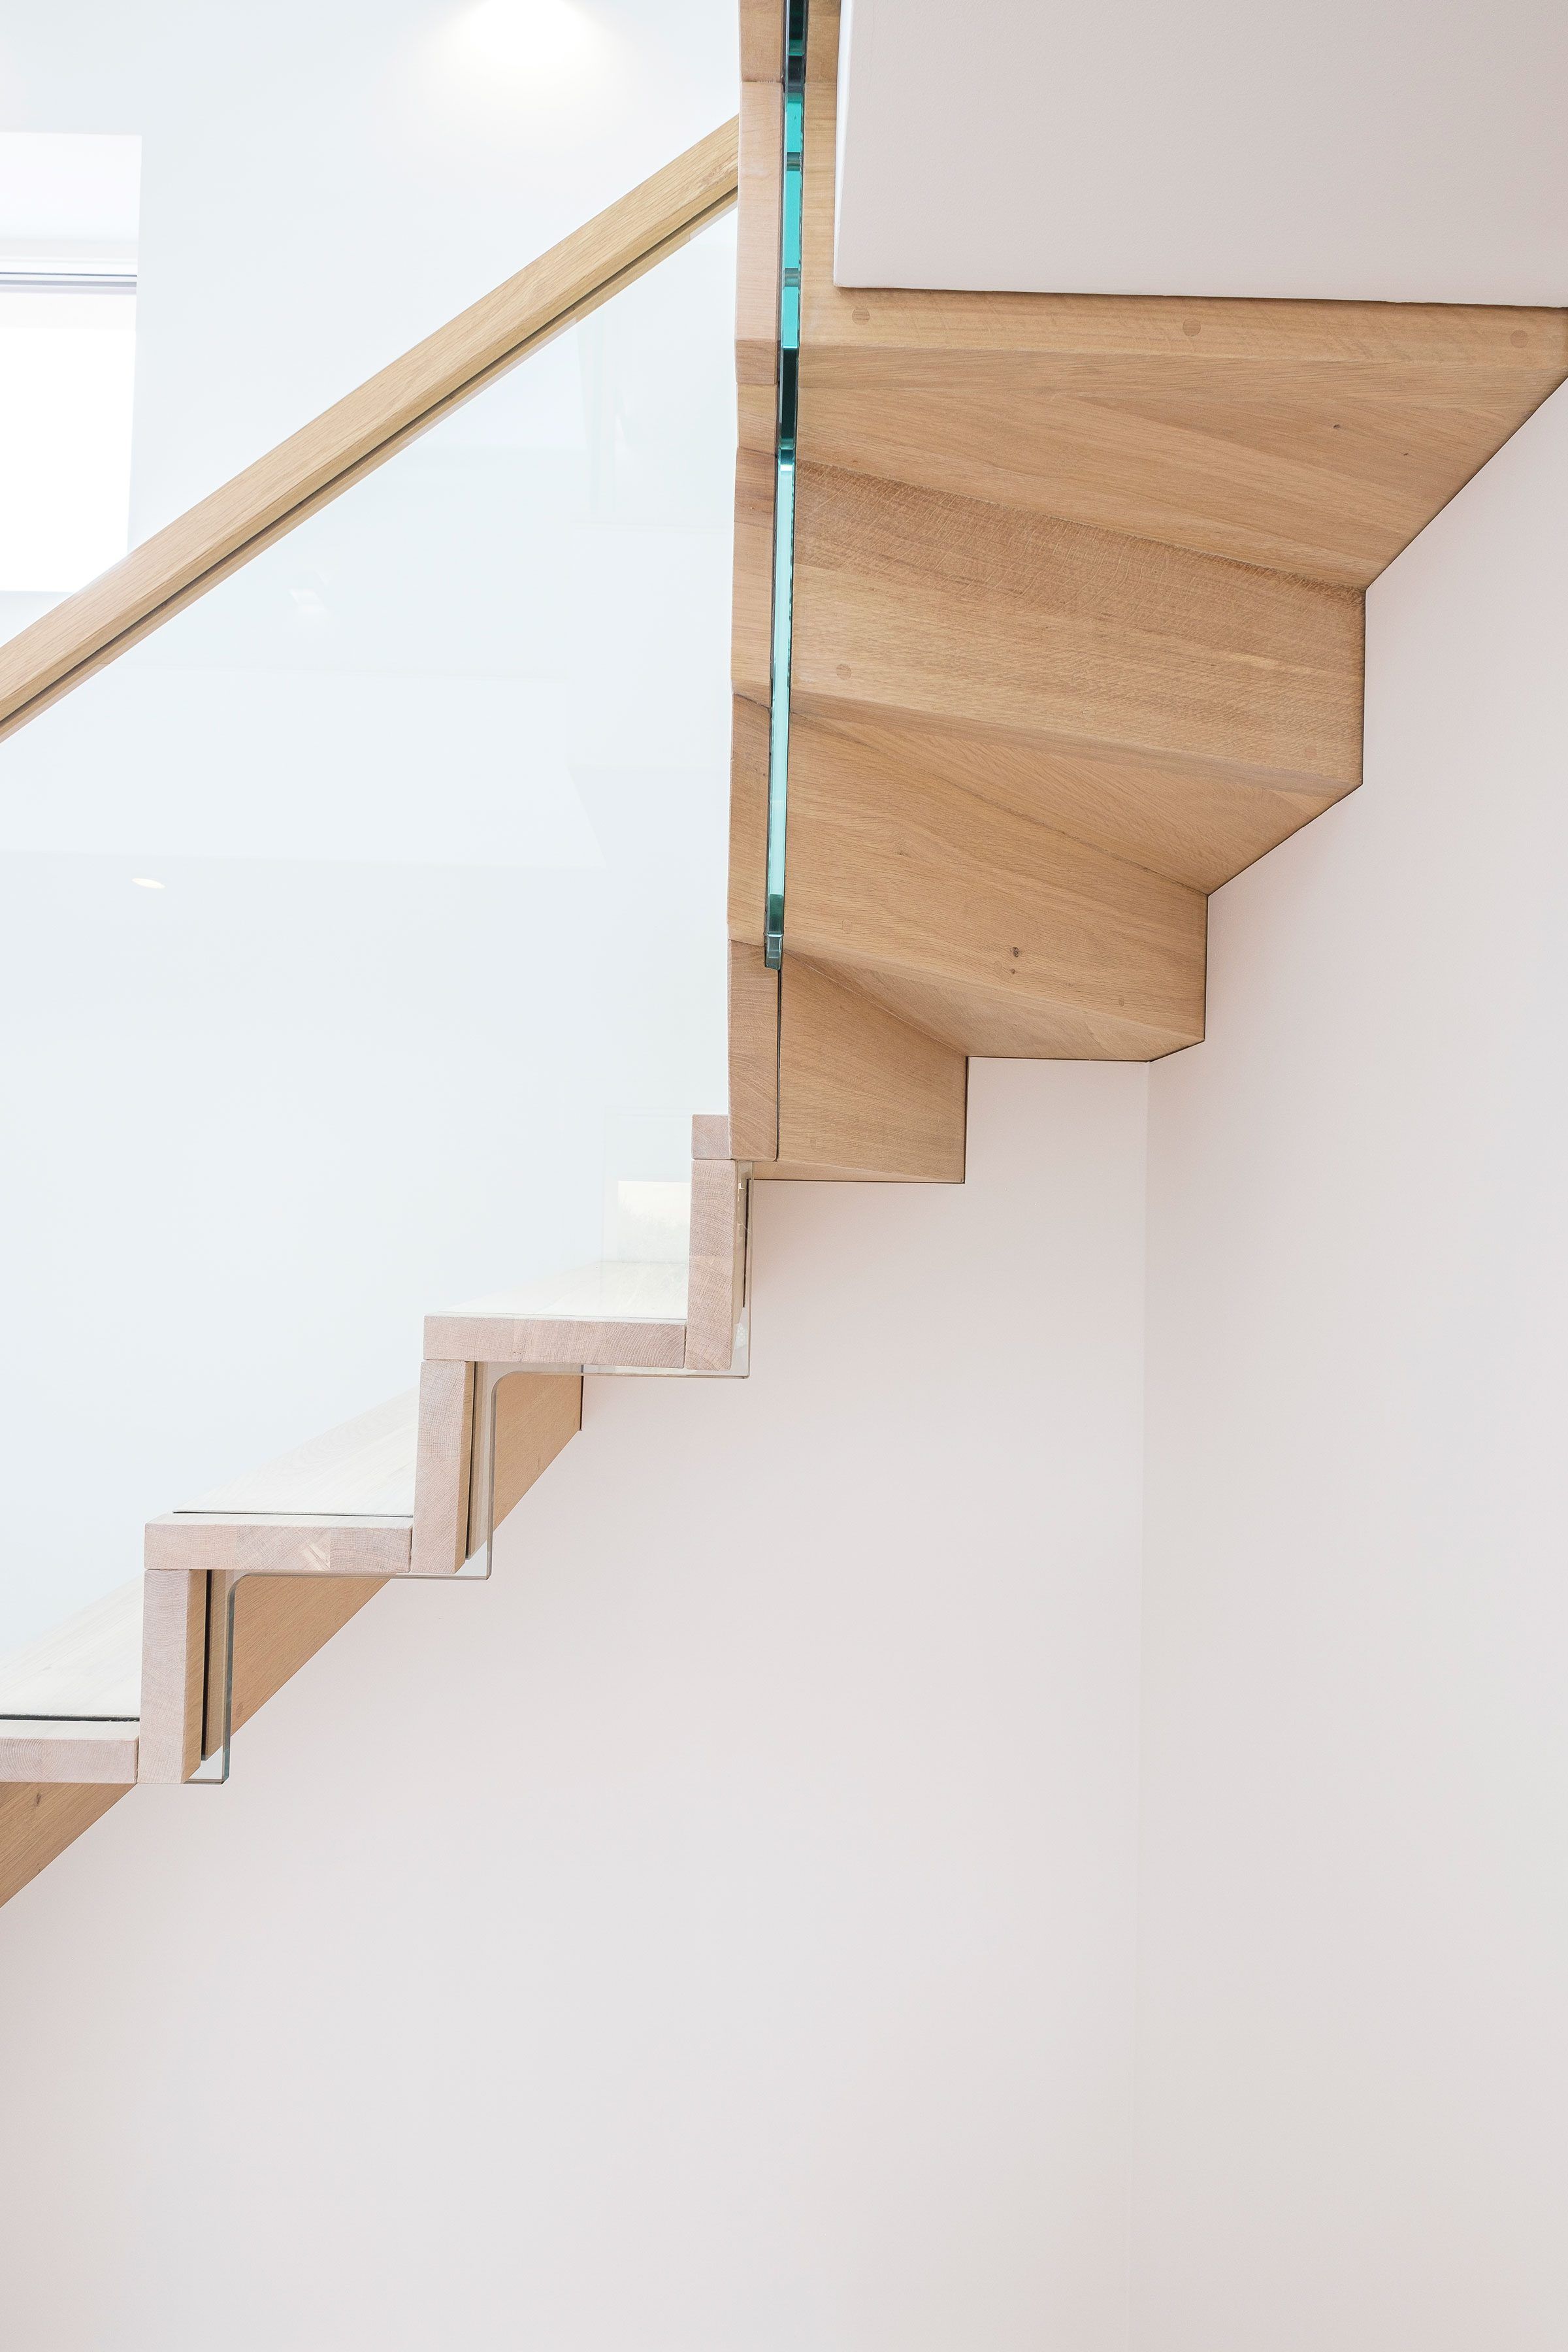 Underside view of slim profile cantilevered oak staircase handrail and glass balustrade. White wall.